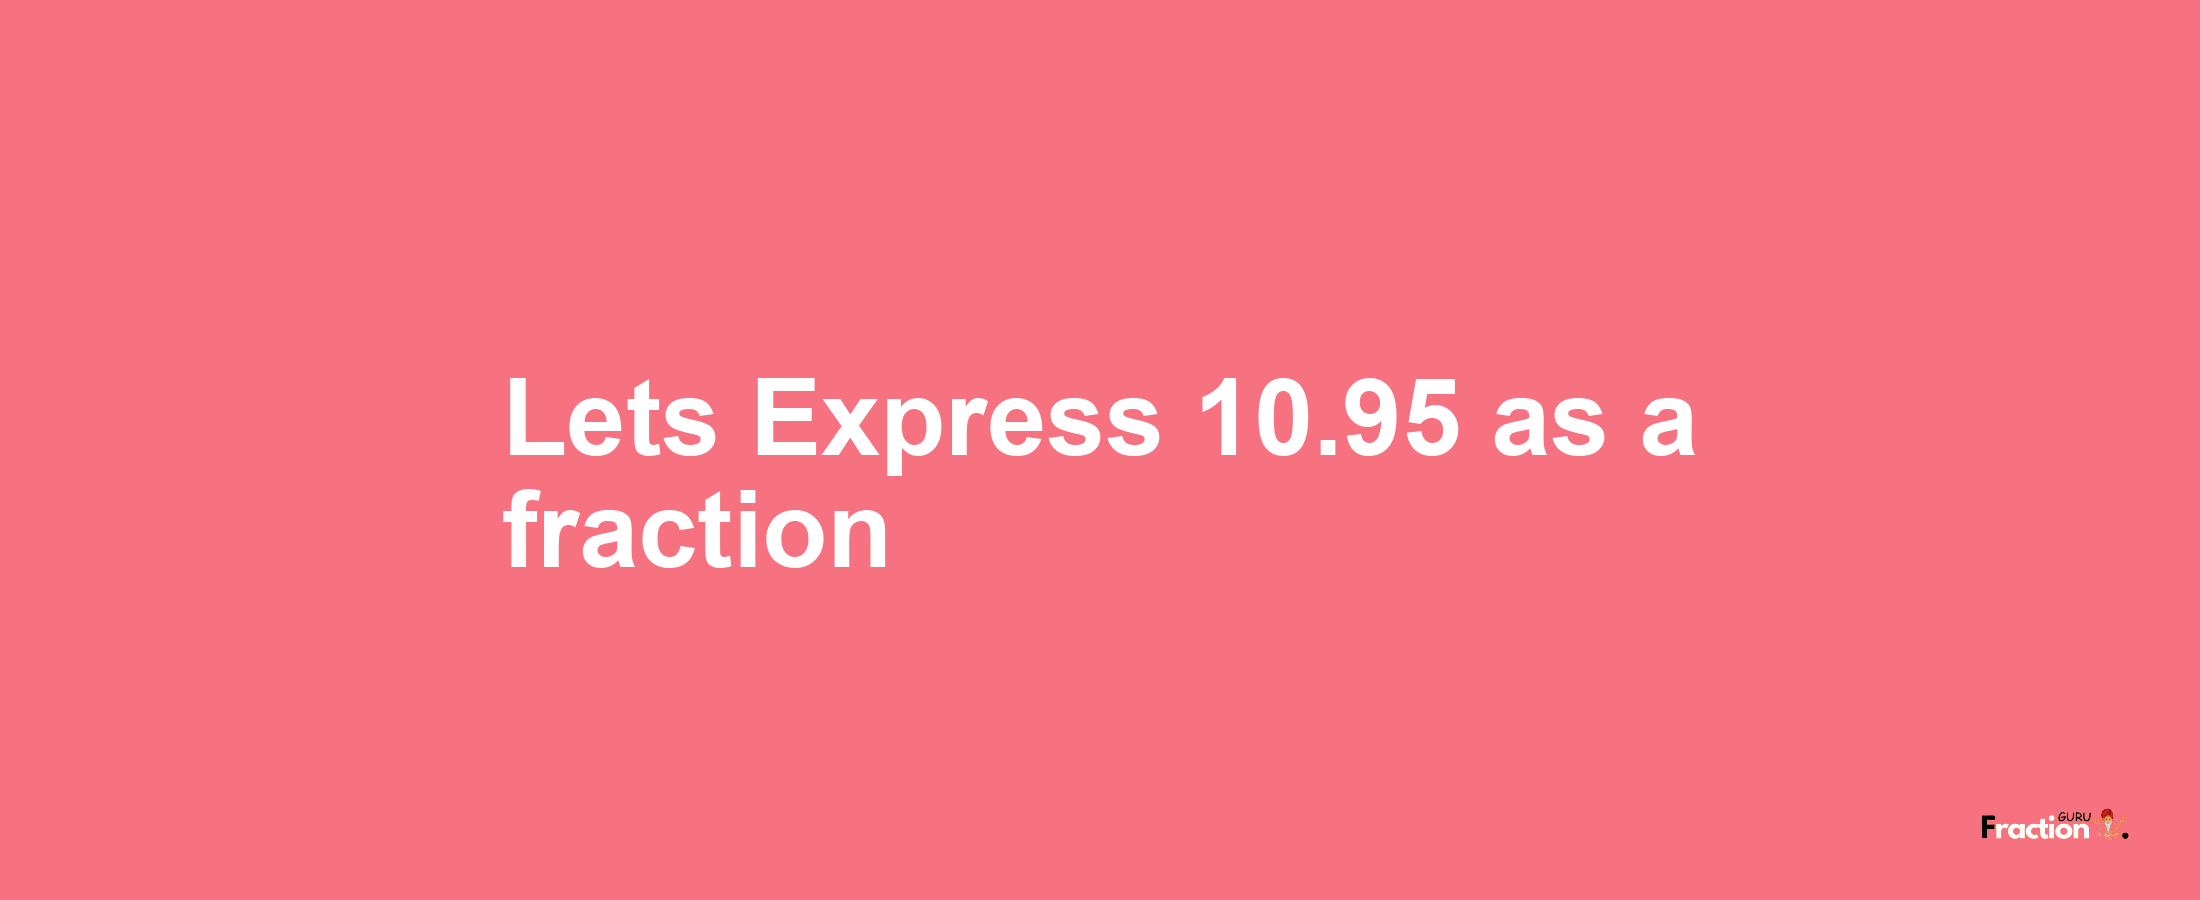 Lets Express 10.95 as afraction